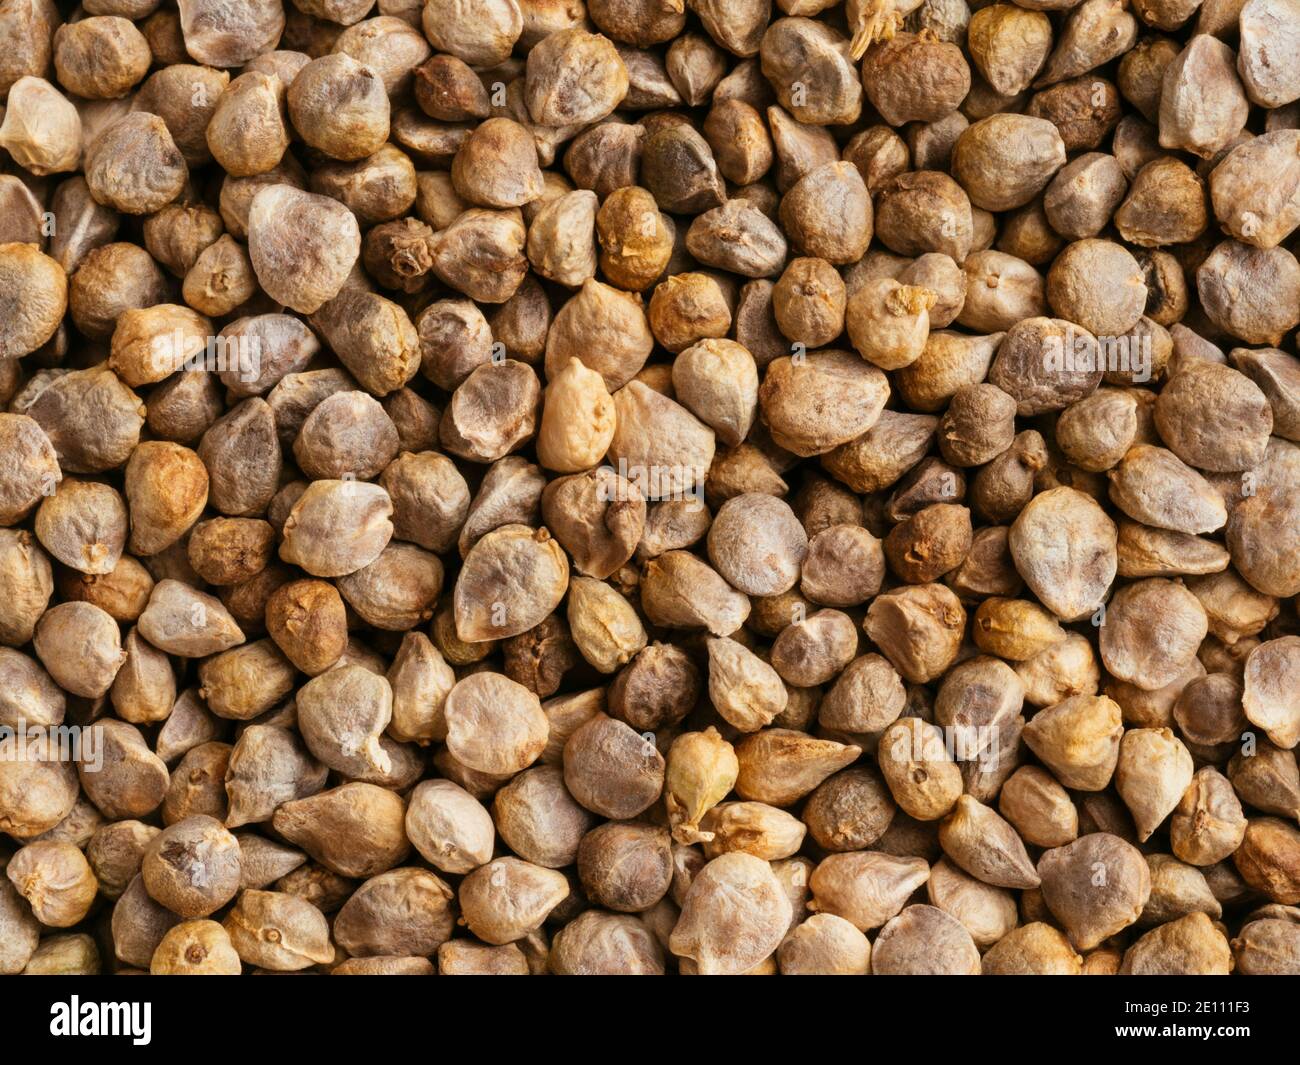 Overhead view of spinach (Spinacia oleracea) seeds. Stock Photo